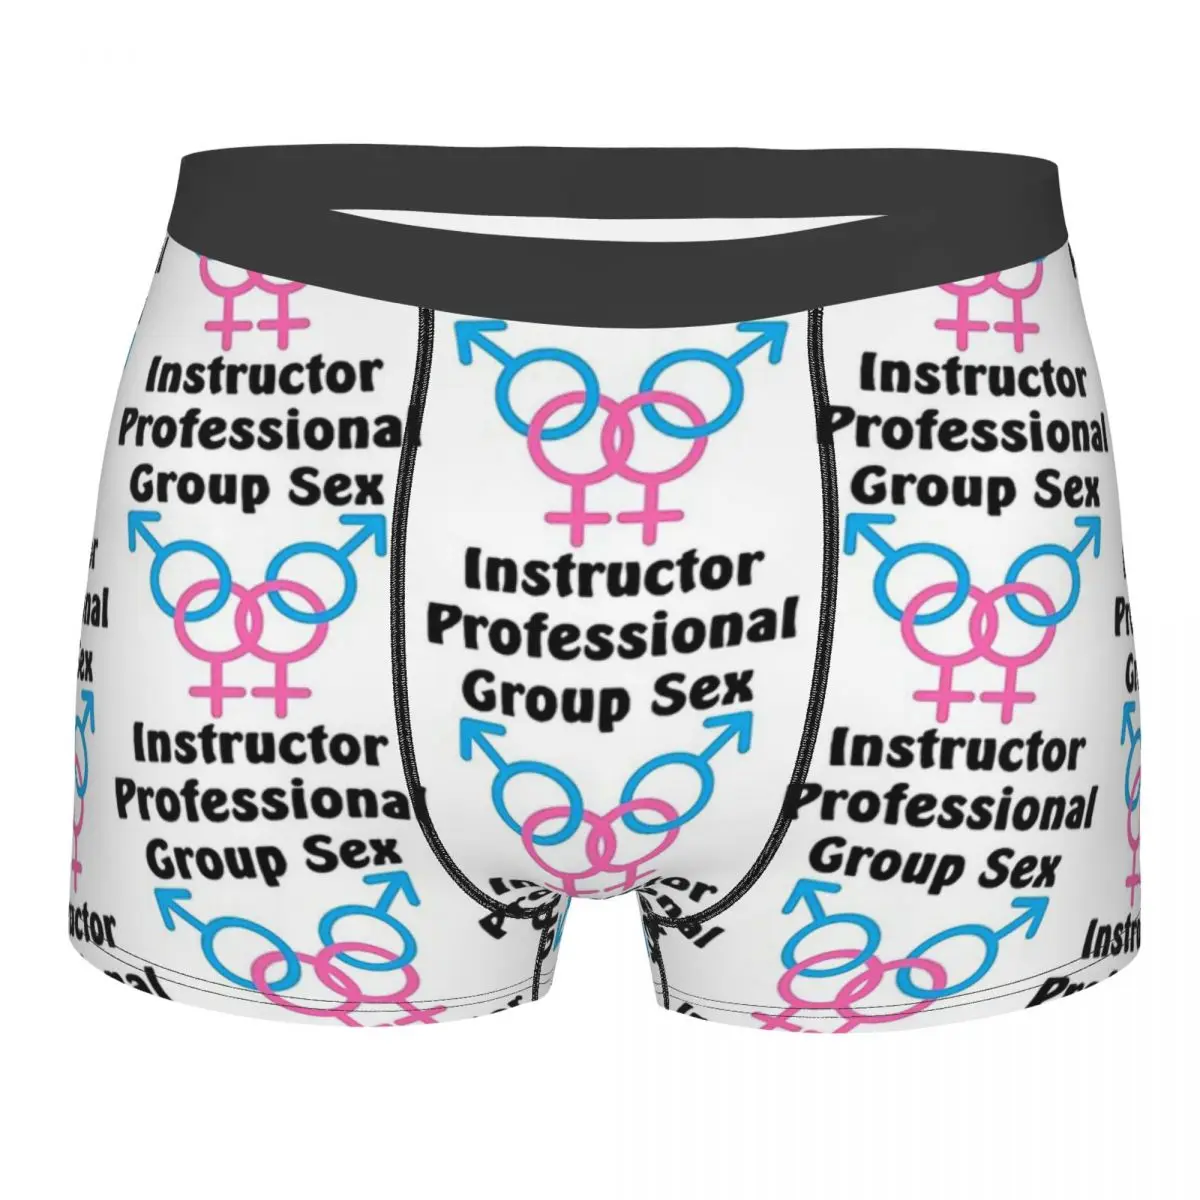 Professional Group Sex Instructor Men Underwear Highly Breathable Top Quality Birthday Gifts